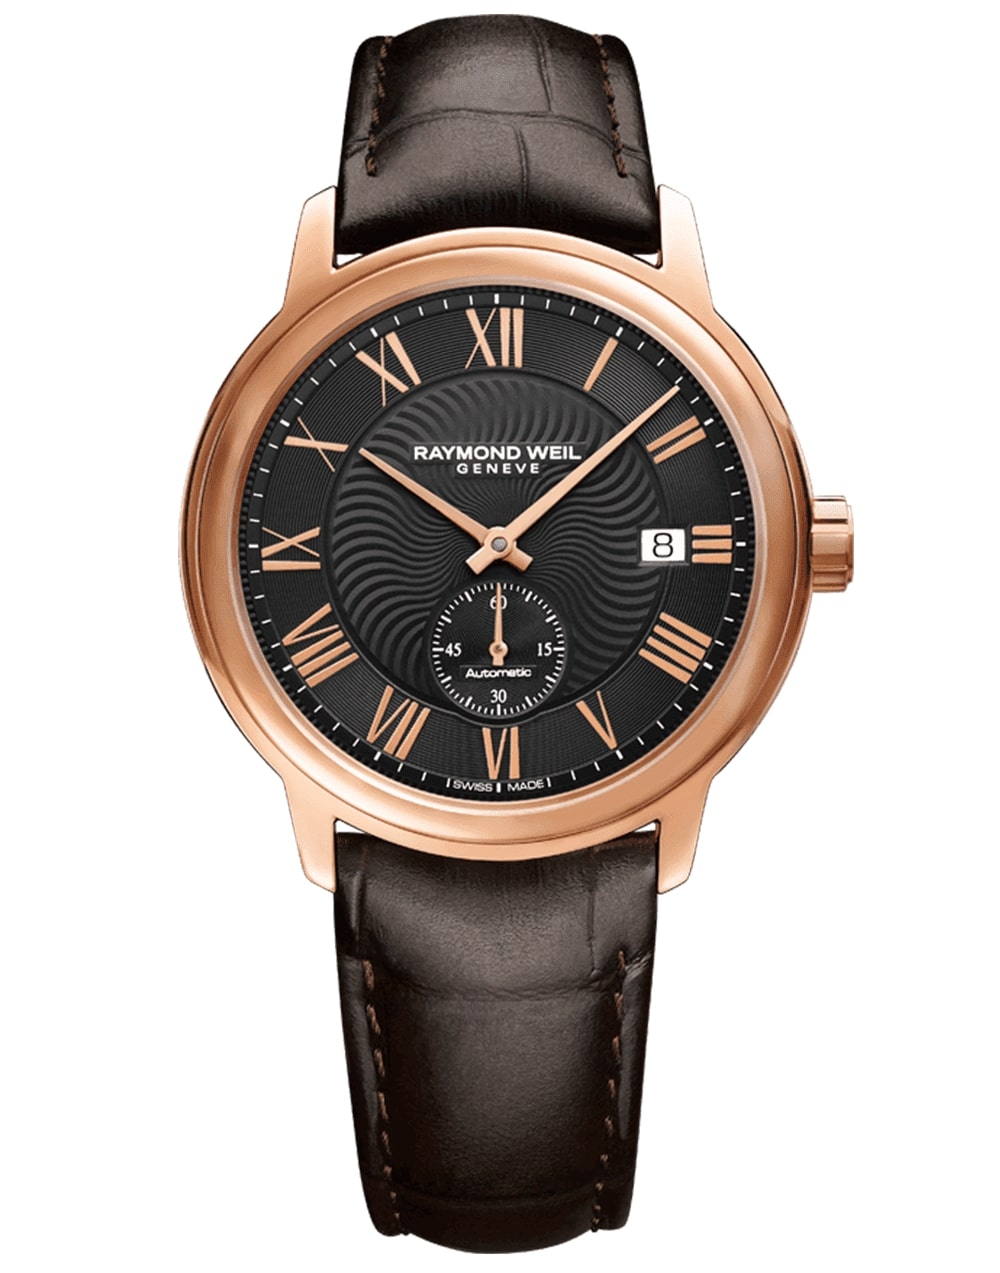 Men's Rose Gold Automatic Leather Raymond Weil Watch